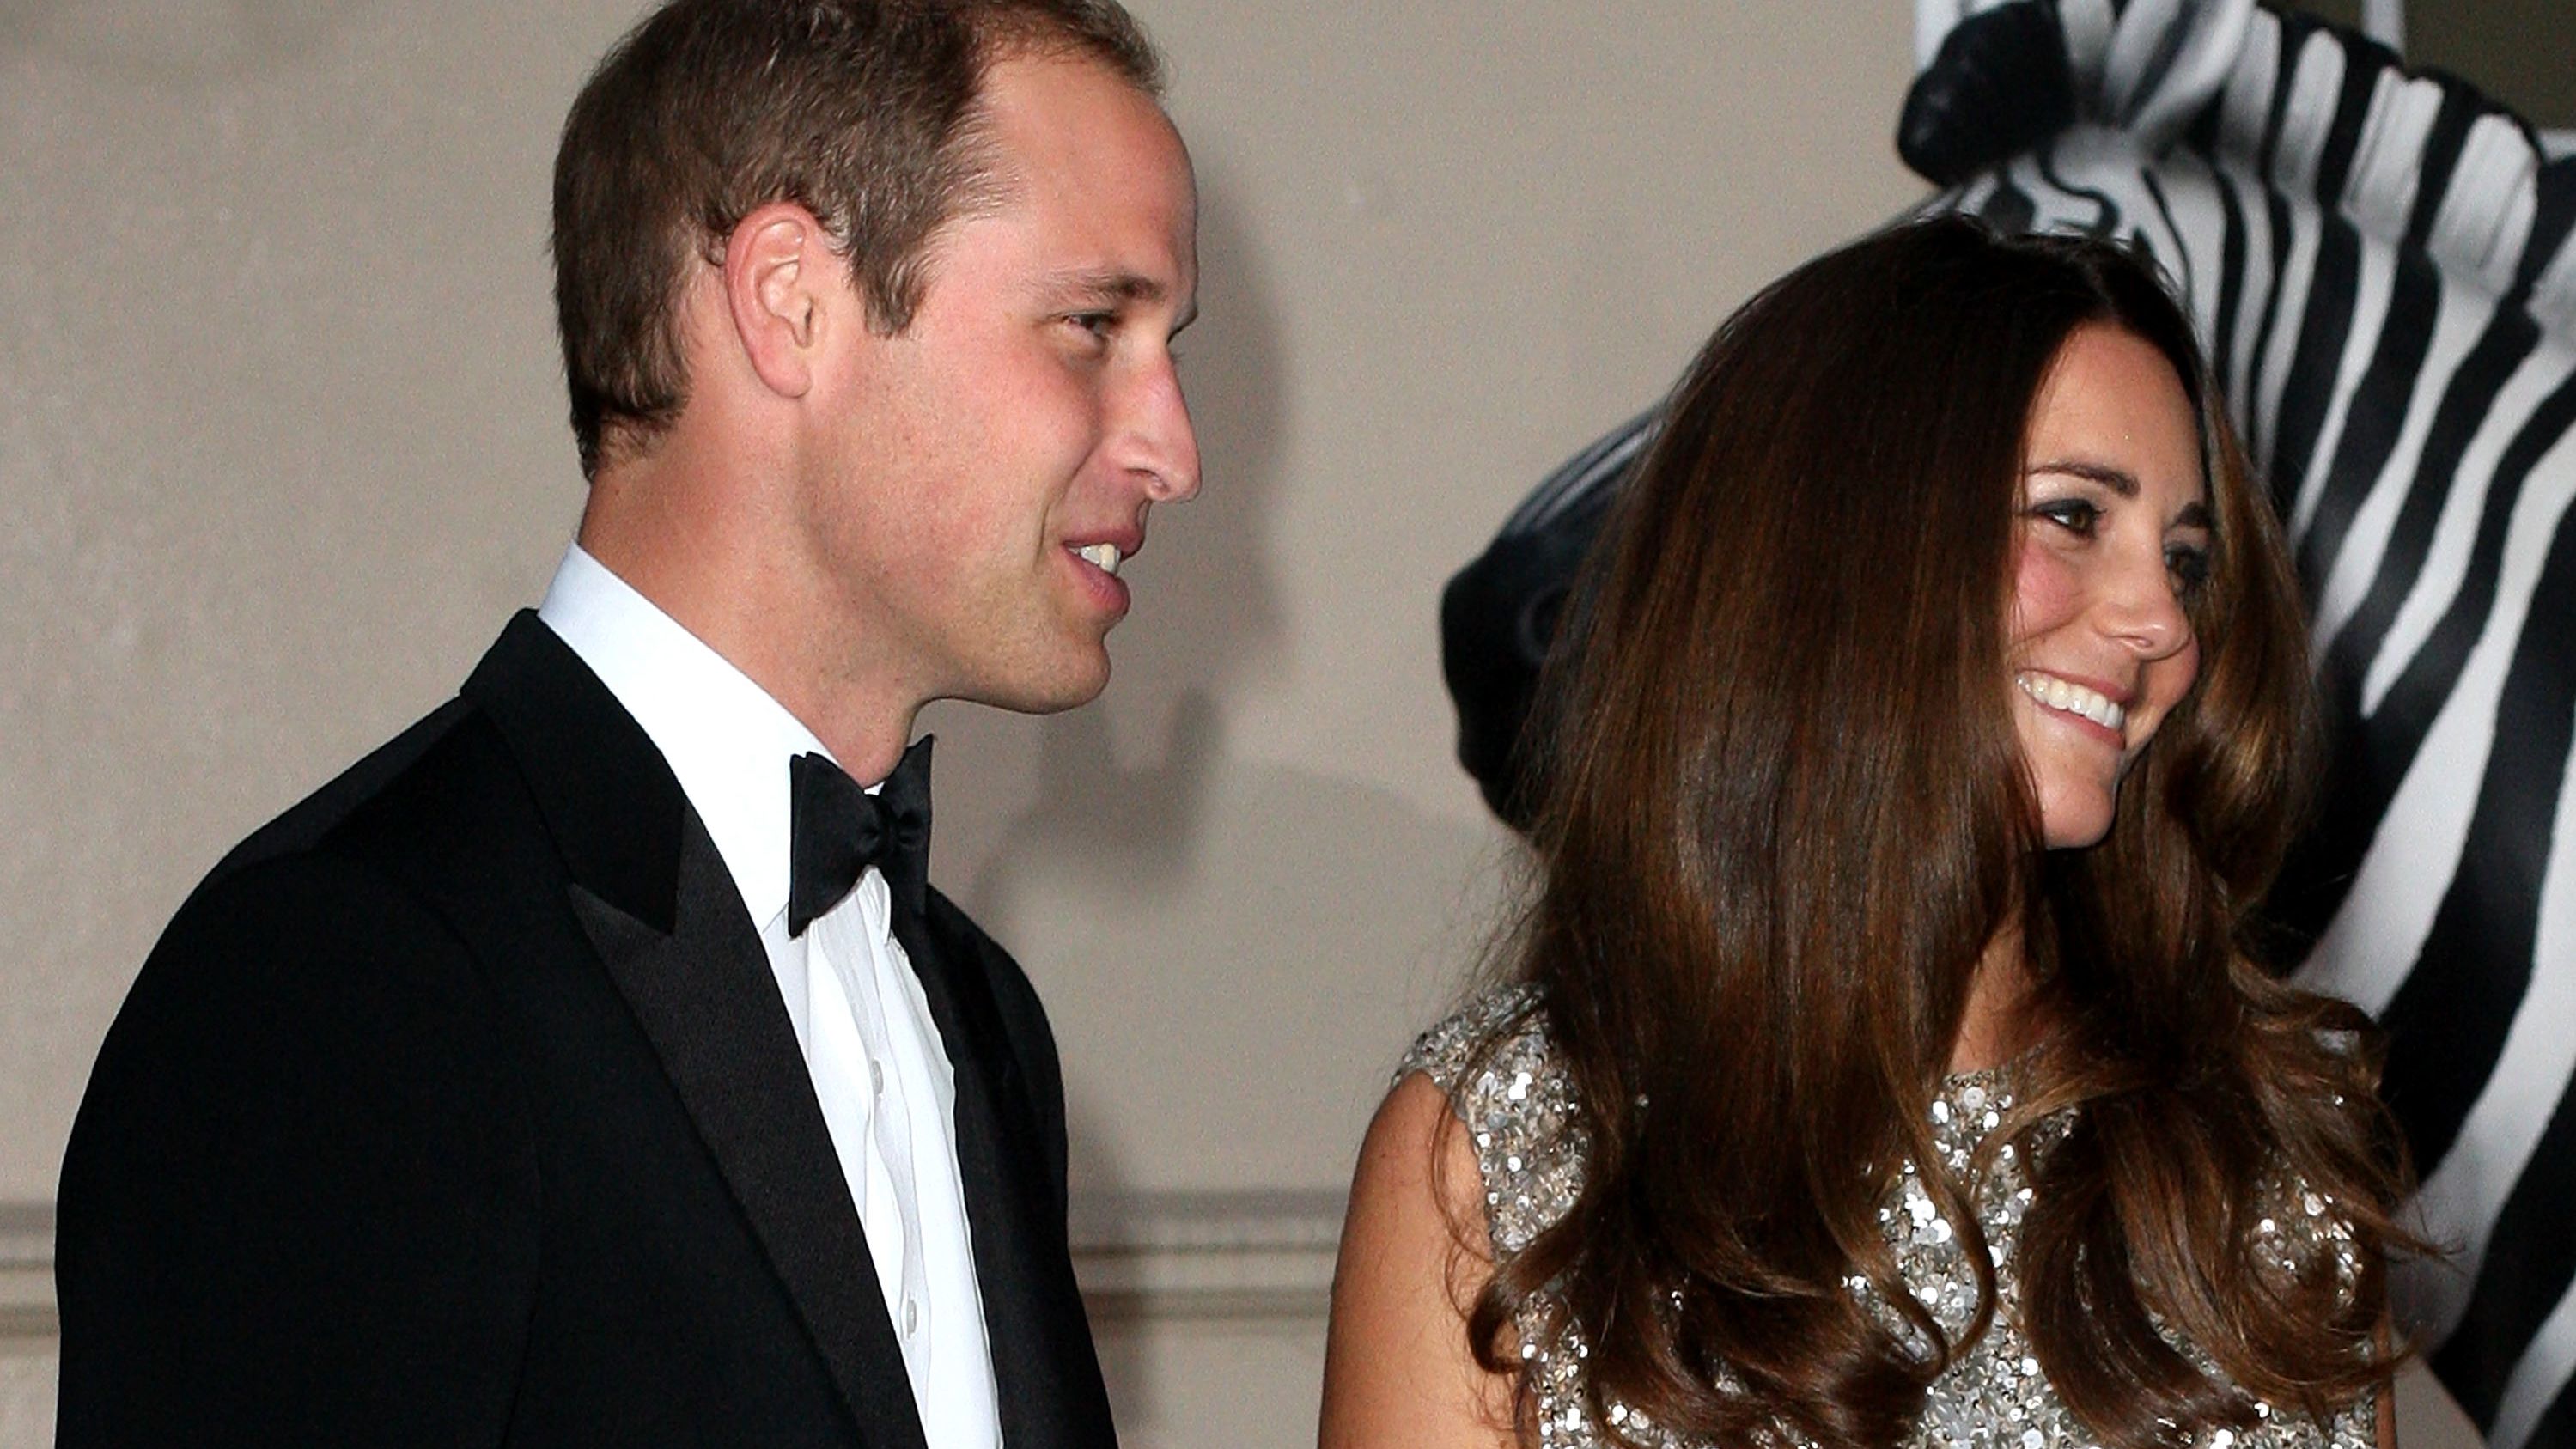 The royal couple attends the Tusk Conservation Awards at the Royal Society in London in September 2013.